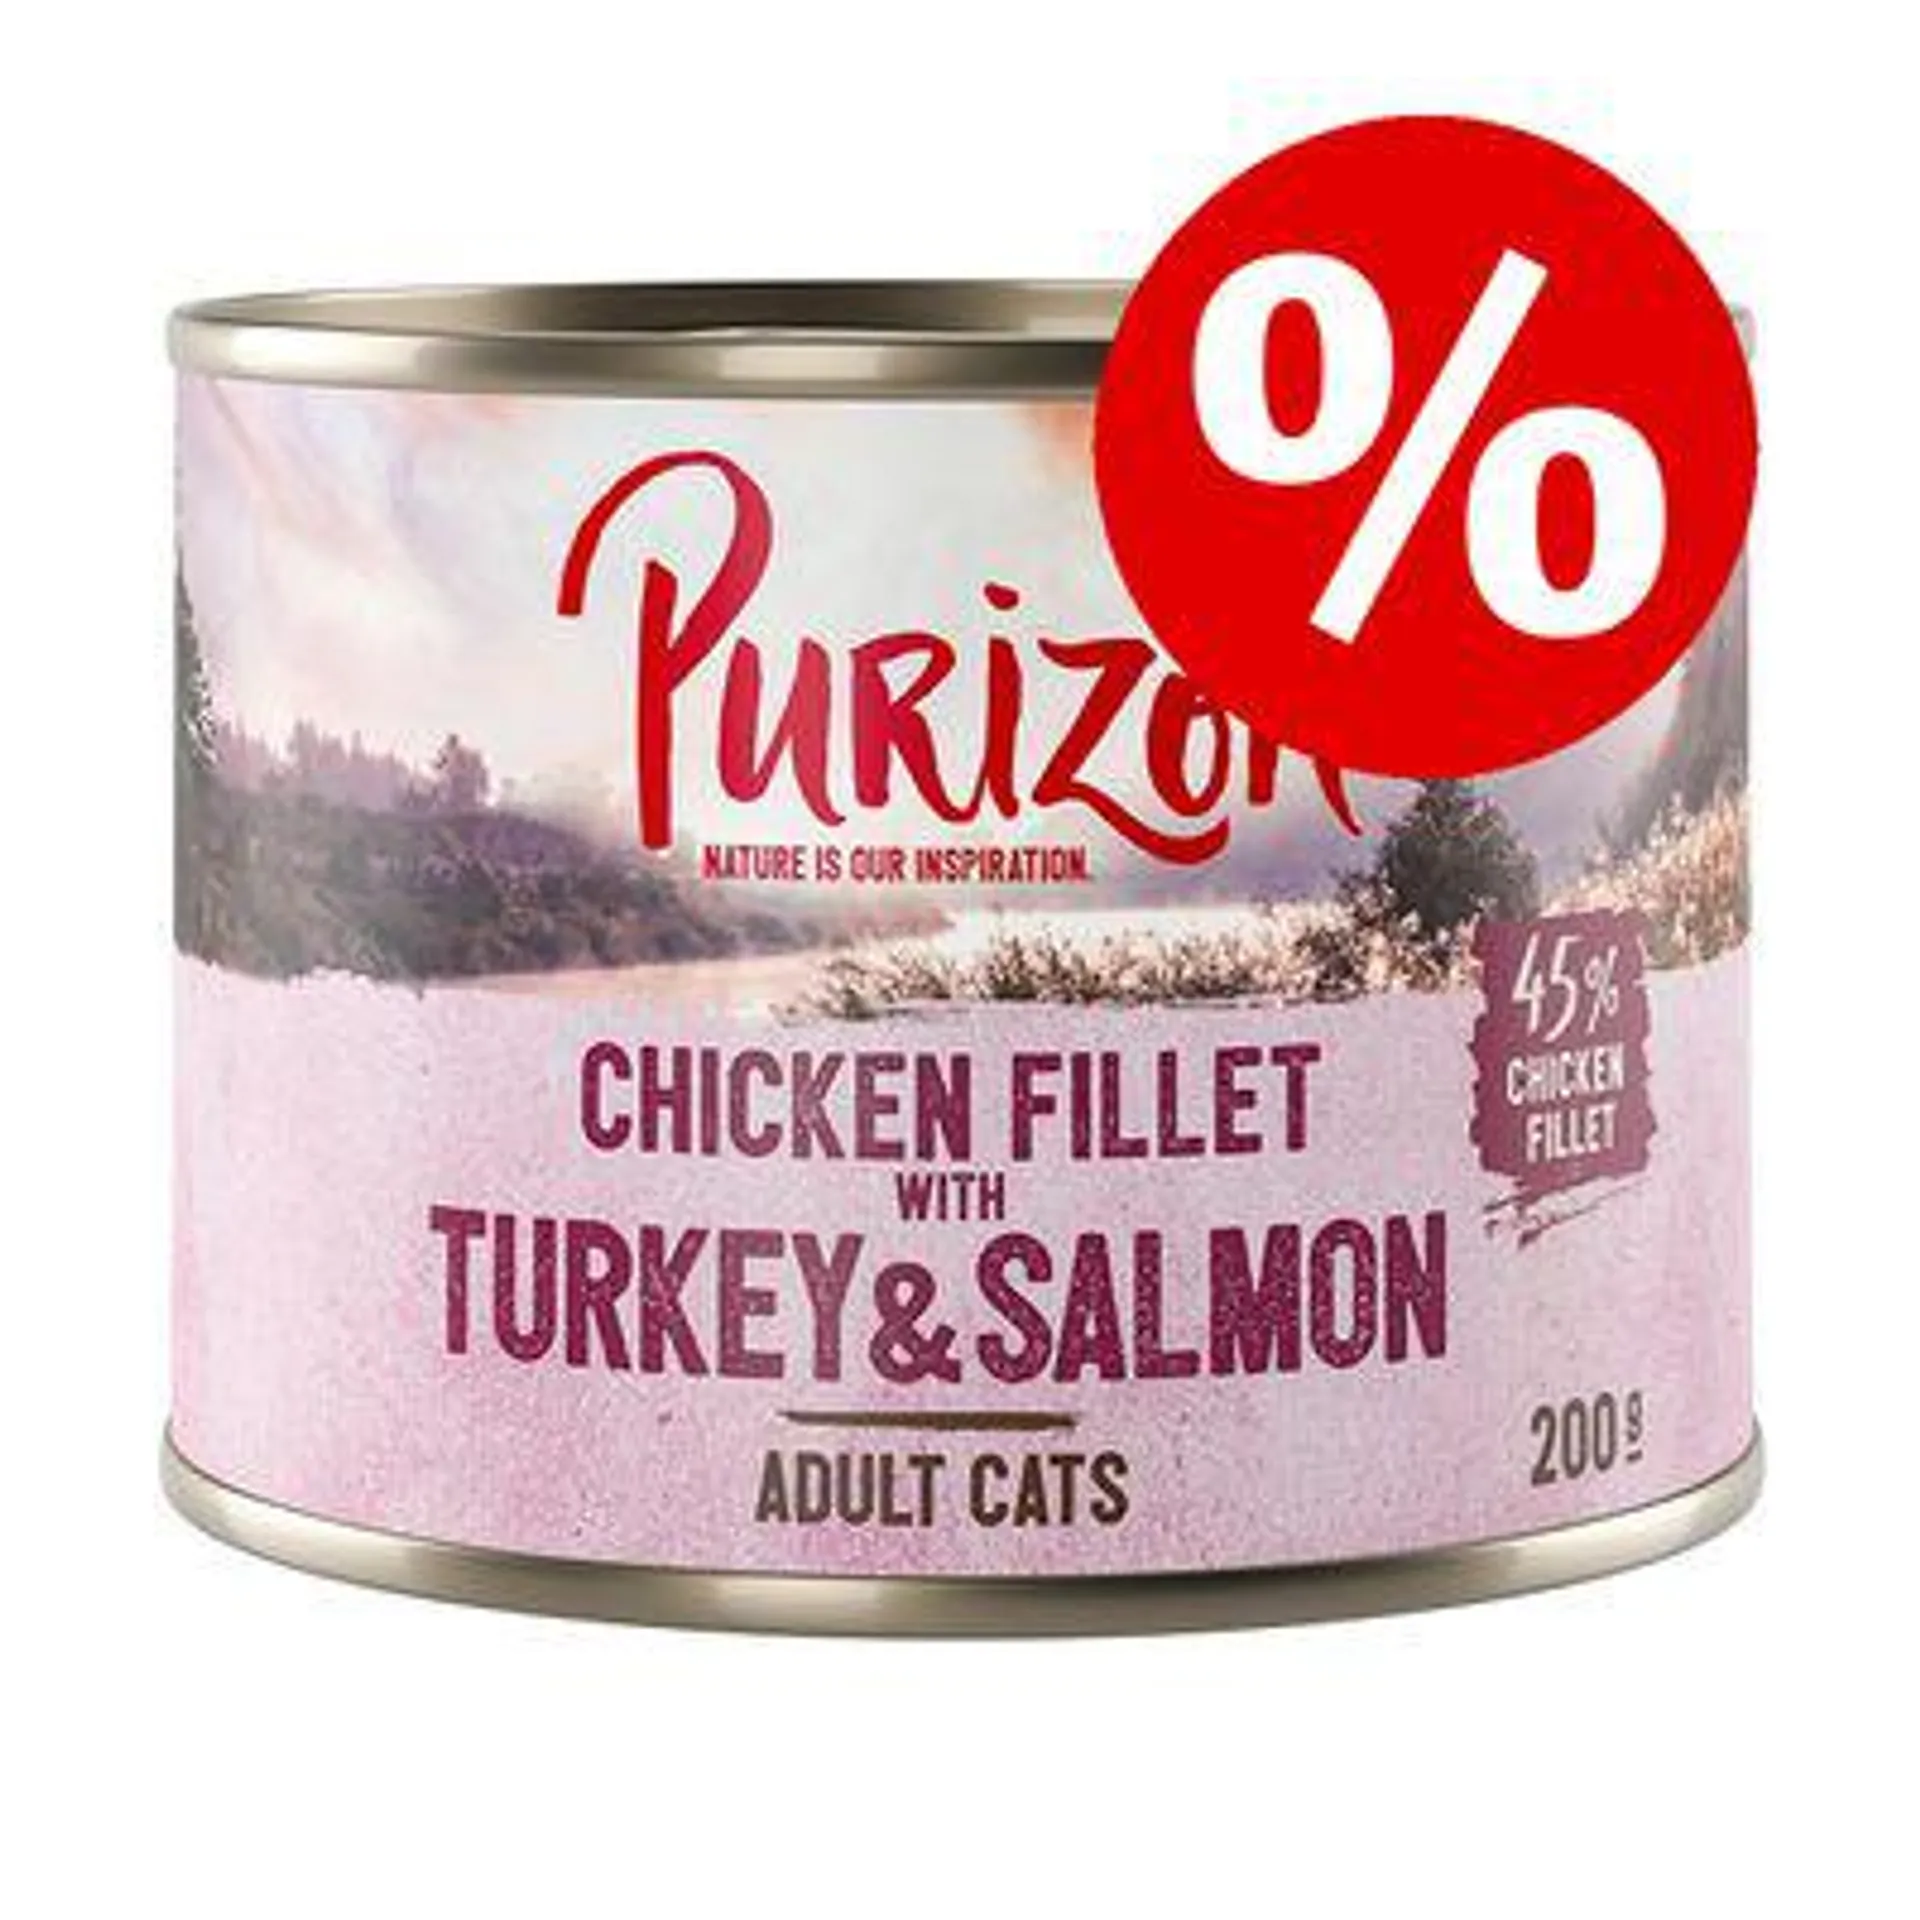 6 x 200g/400g Purizon Adult Wet Cat Food - Special Price!*